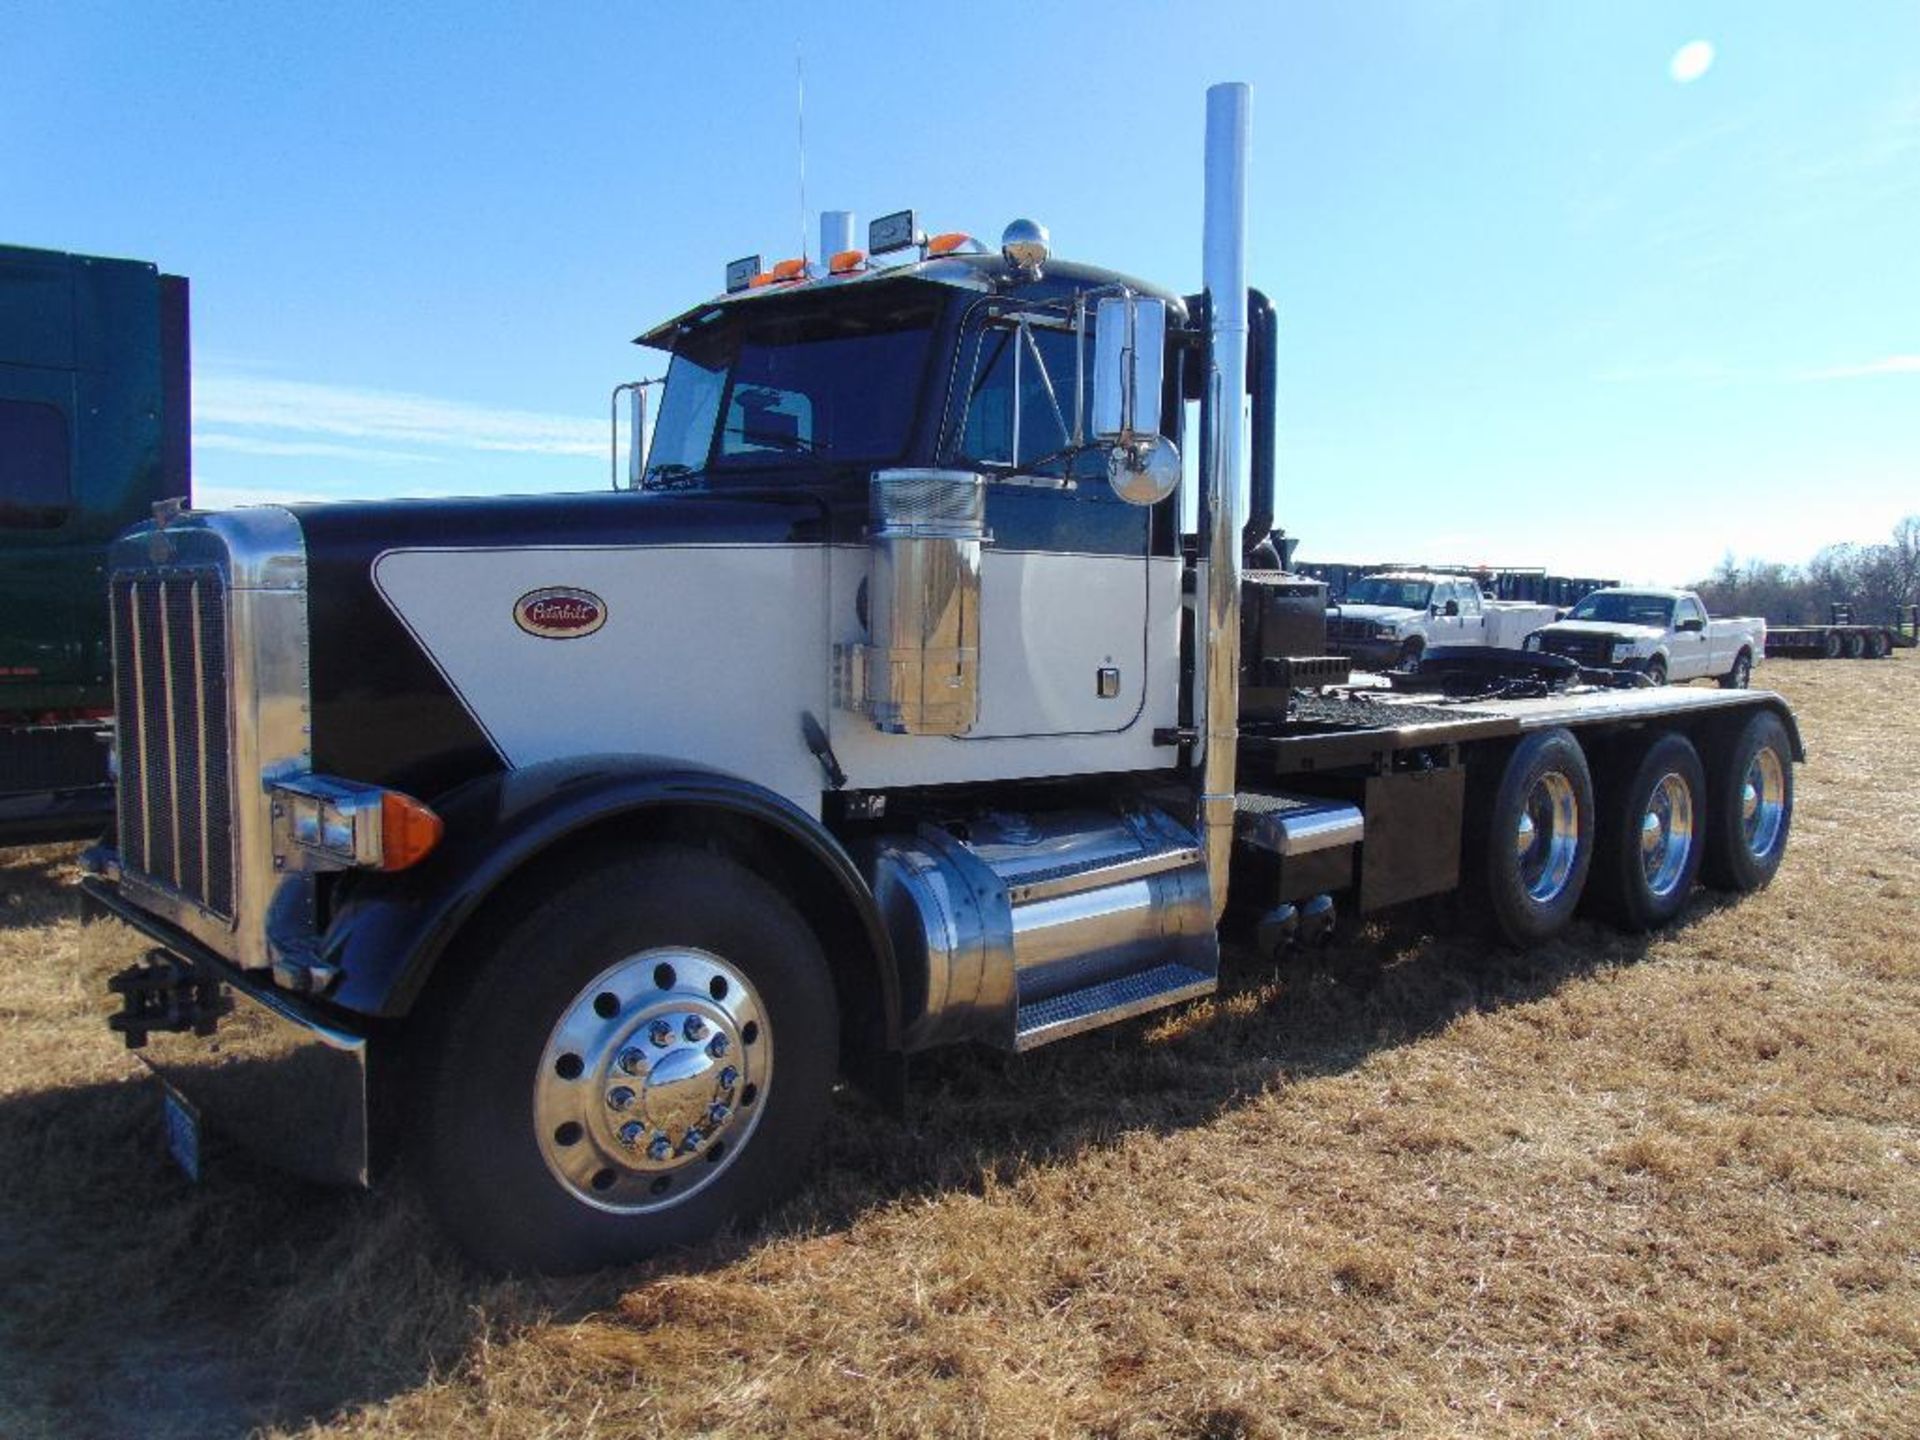 1998 Peterbilt 378 Tri Axle Winch Tractor, s/n 1xpfpbex2wn444045 new crate 3406e eng, 18 spd trans, - Image 3 of 14